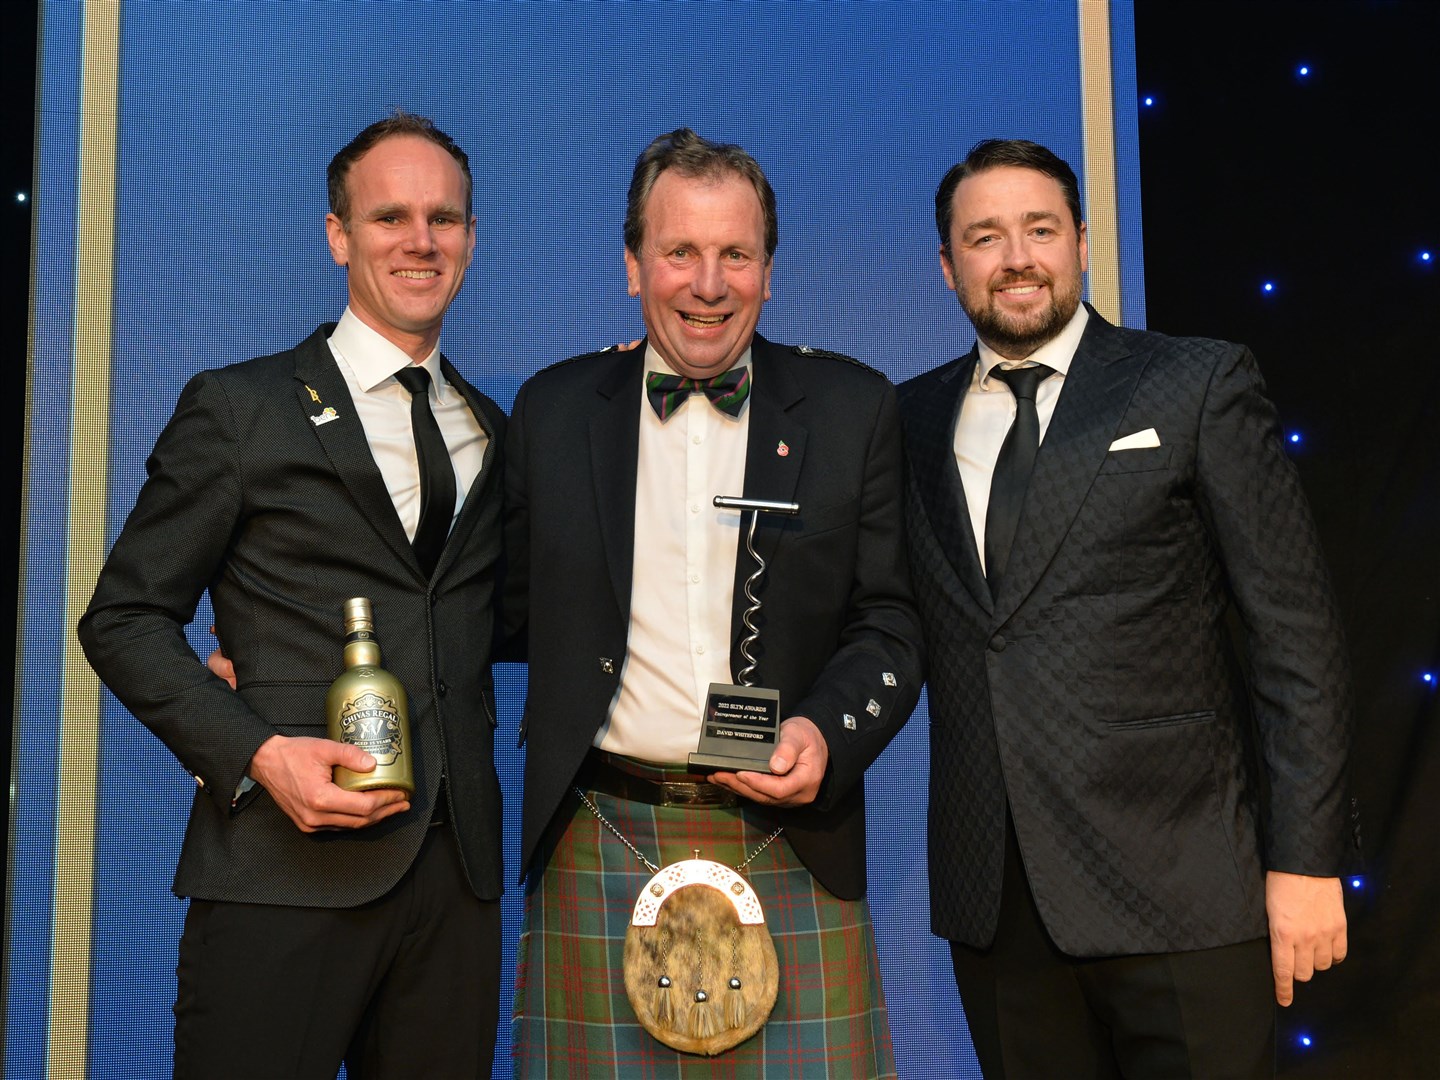 Award sponsior Mike Phillips, regional manager of Chivas Regal with SLTN entrepreneur of the year David Whiteford and awards host Jason Manford.